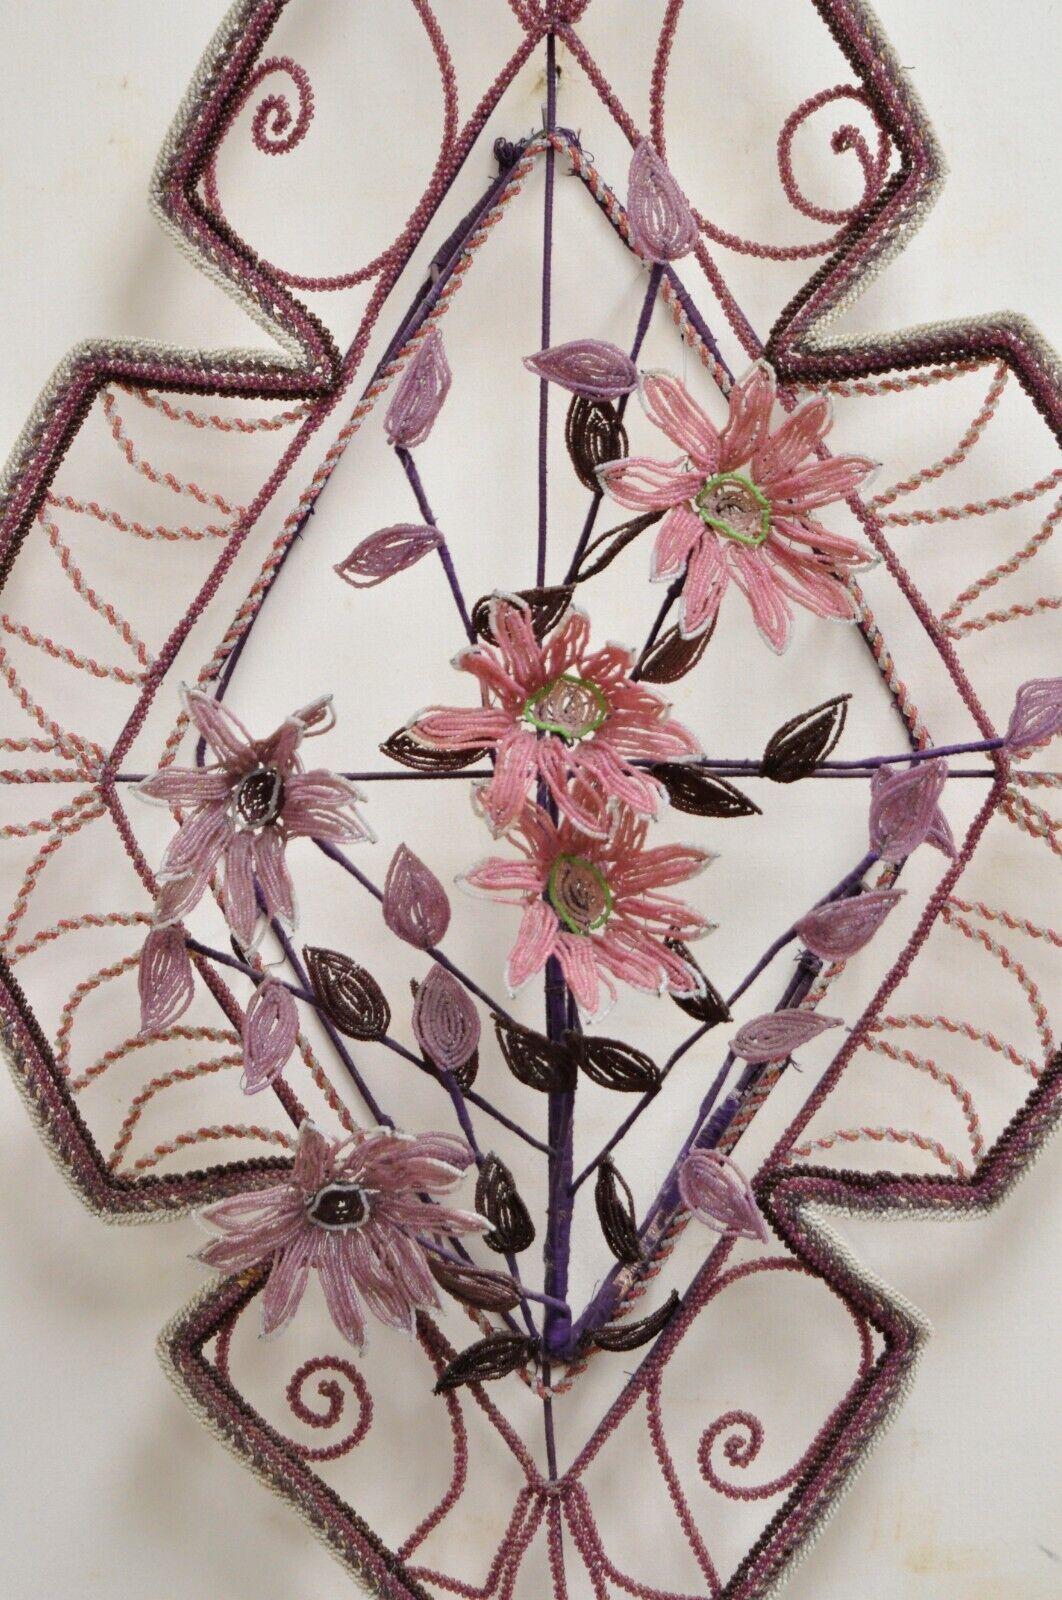 19th Century French Victorian Glass Beaded Purple Flower Casket Wreath Wall Sculpture 'B' For Sale